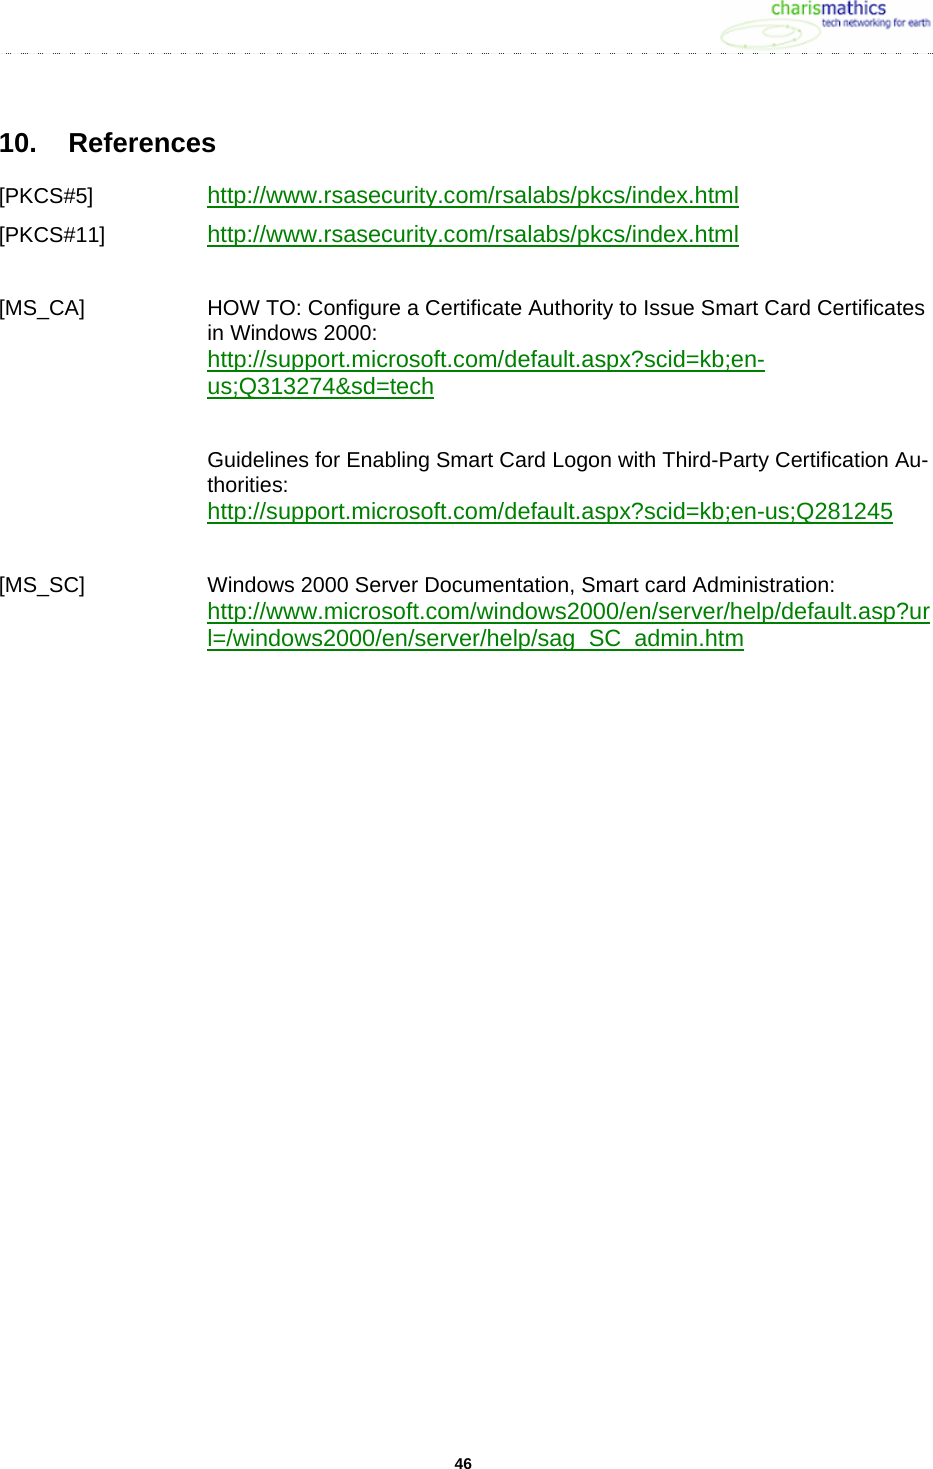     4610. References [PKCS#5]   http://www.rsasecurity.com/rsalabs/pkcs/index.html  [PKCS#11]   http://www.rsasecurity.com/rsalabs/pkcs/index.html  [MS_CA]  HOW TO: Configure a Certificate Authority to Issue Smart Card Certificates in Windows 2000: http://support.microsoft.com/default.aspx?scid=kb;en-us;Q313274&amp;sd=tech  Guidelines for Enabling Smart Card Logon with Third-Party Certification Au-thorities: http://support.microsoft.com/default.aspx?scid=kb;en-us;Q281245  [MS_SC]  Windows 2000 Server Documentation, Smart card Administration: http://www.microsoft.com/windows2000/en/server/help/default.asp?url=/windows2000/en/server/help/sag_SC_admin.htm   